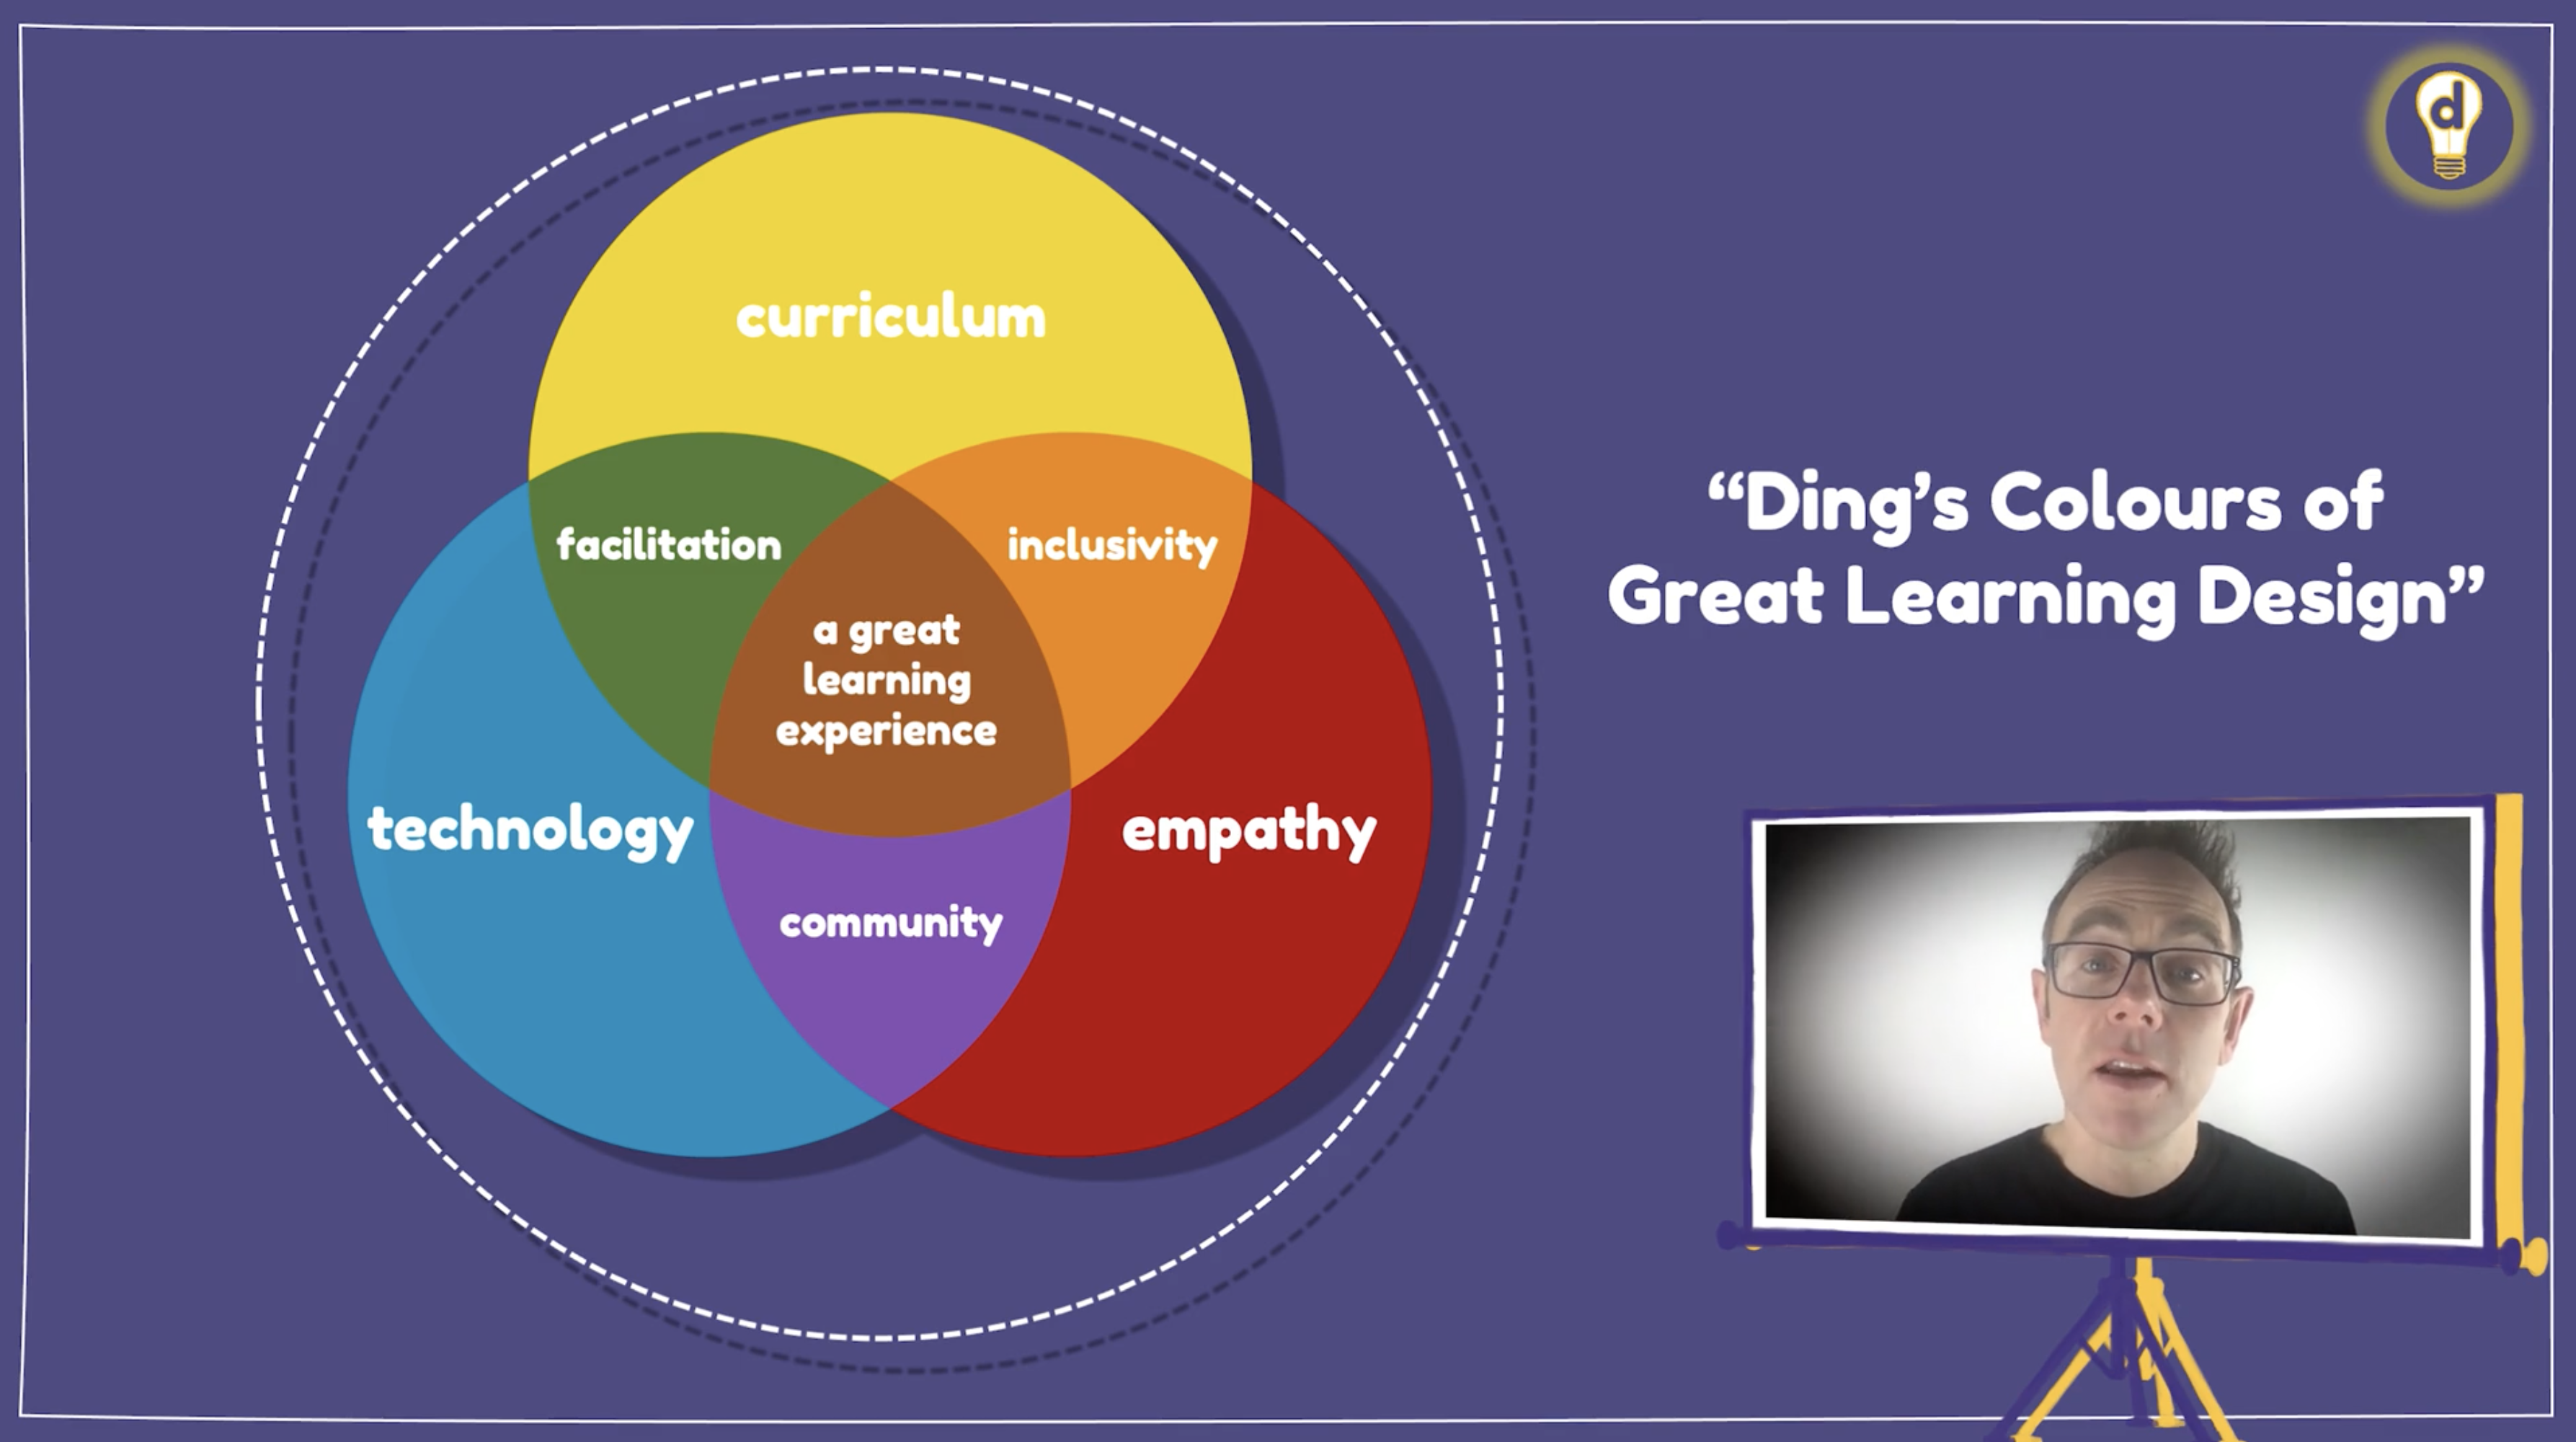 Ding's Colours of Great Learning Design